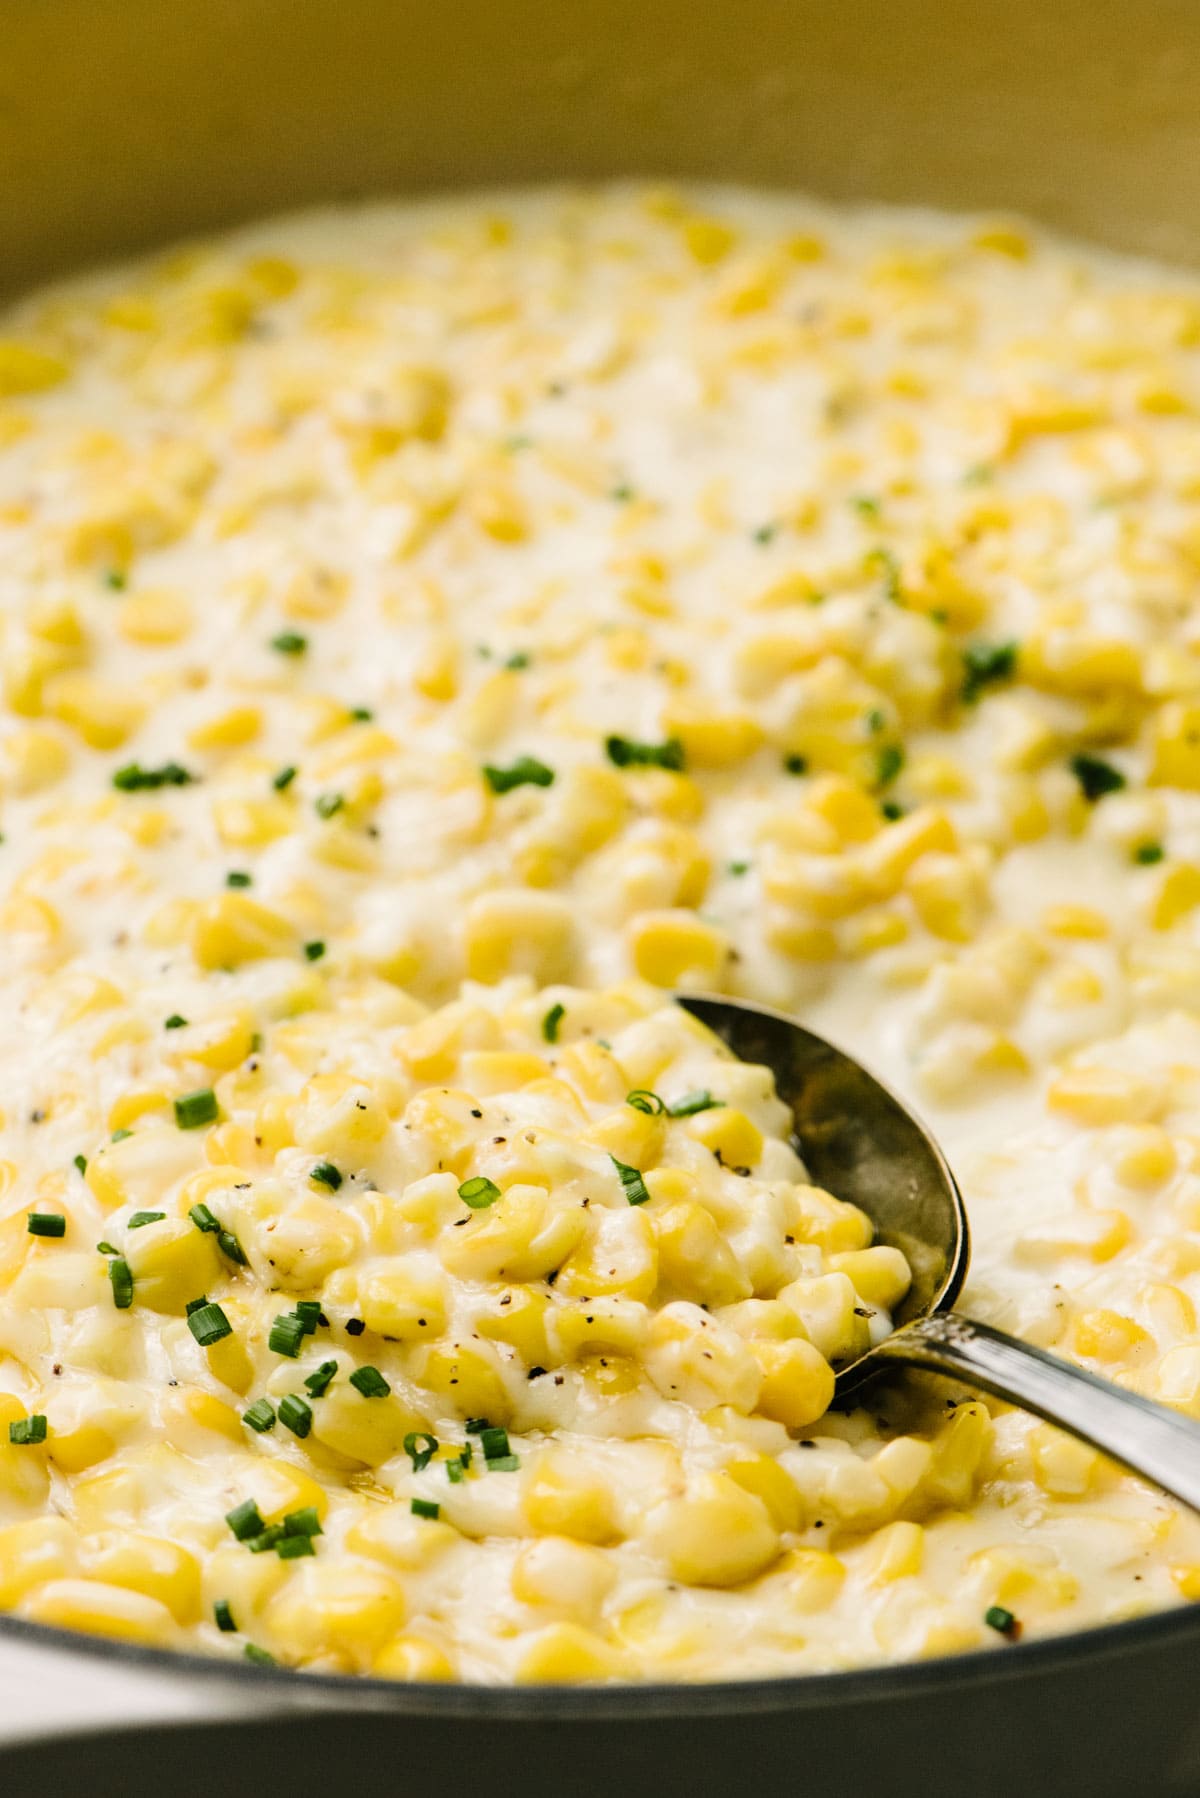 Side view, a serving spoon tucked into a skillet of homemade cream style corn, garnished with fresh chives.